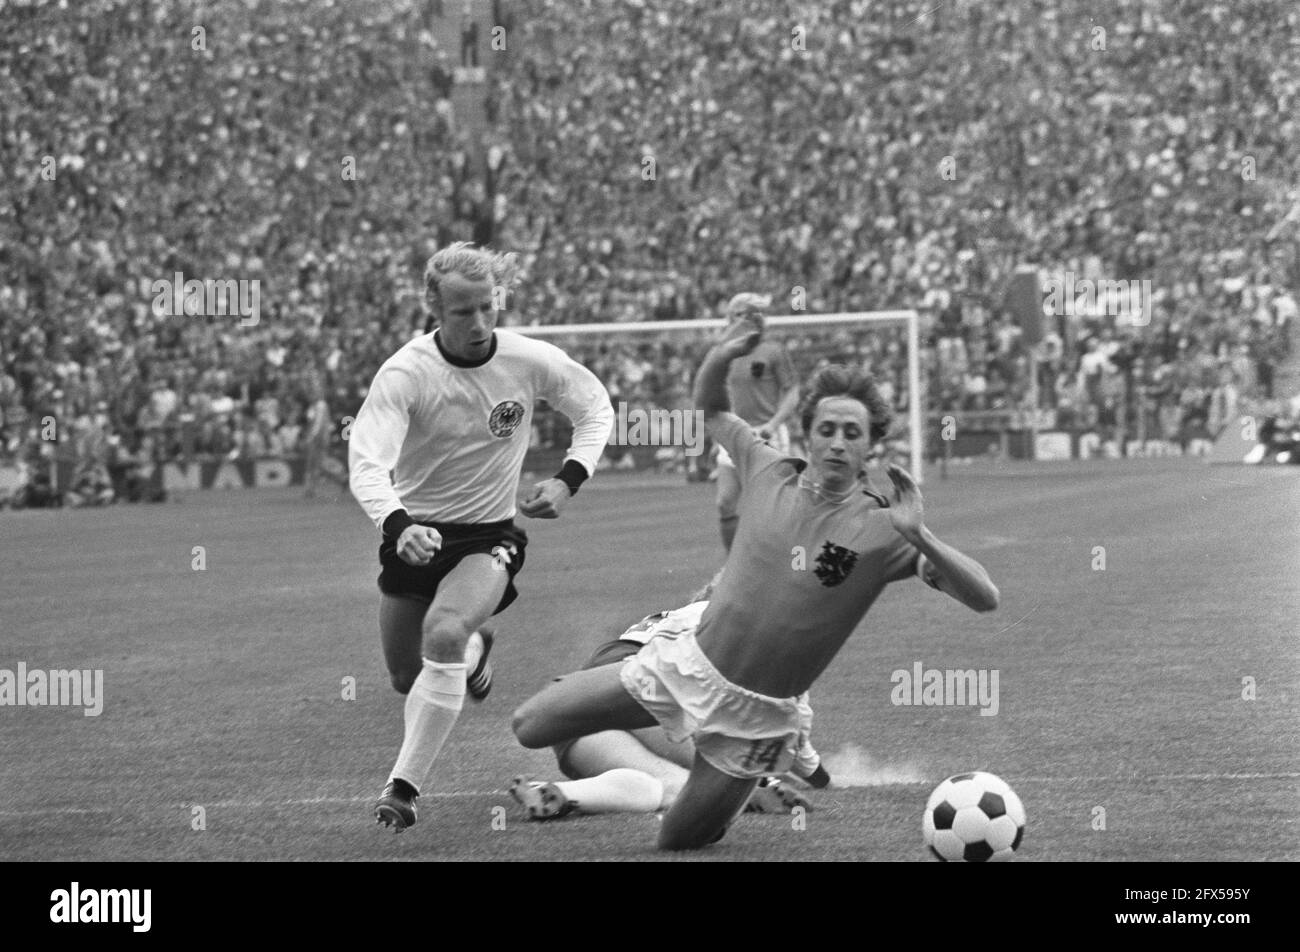 World Cup final 1974 in Munich, West Germany v. Netherlands 2-1; Johan Cruijff is brought down, penalty!!!, left Vogts, July 7, 1974, finals, sports, soccer, world championships, The Netherlands, 20th century press agency photo, news to remember, documentary, historic photography 1945-1990, visual stories, human history of the Twentieth Century, capturing moments in time Stock Photo